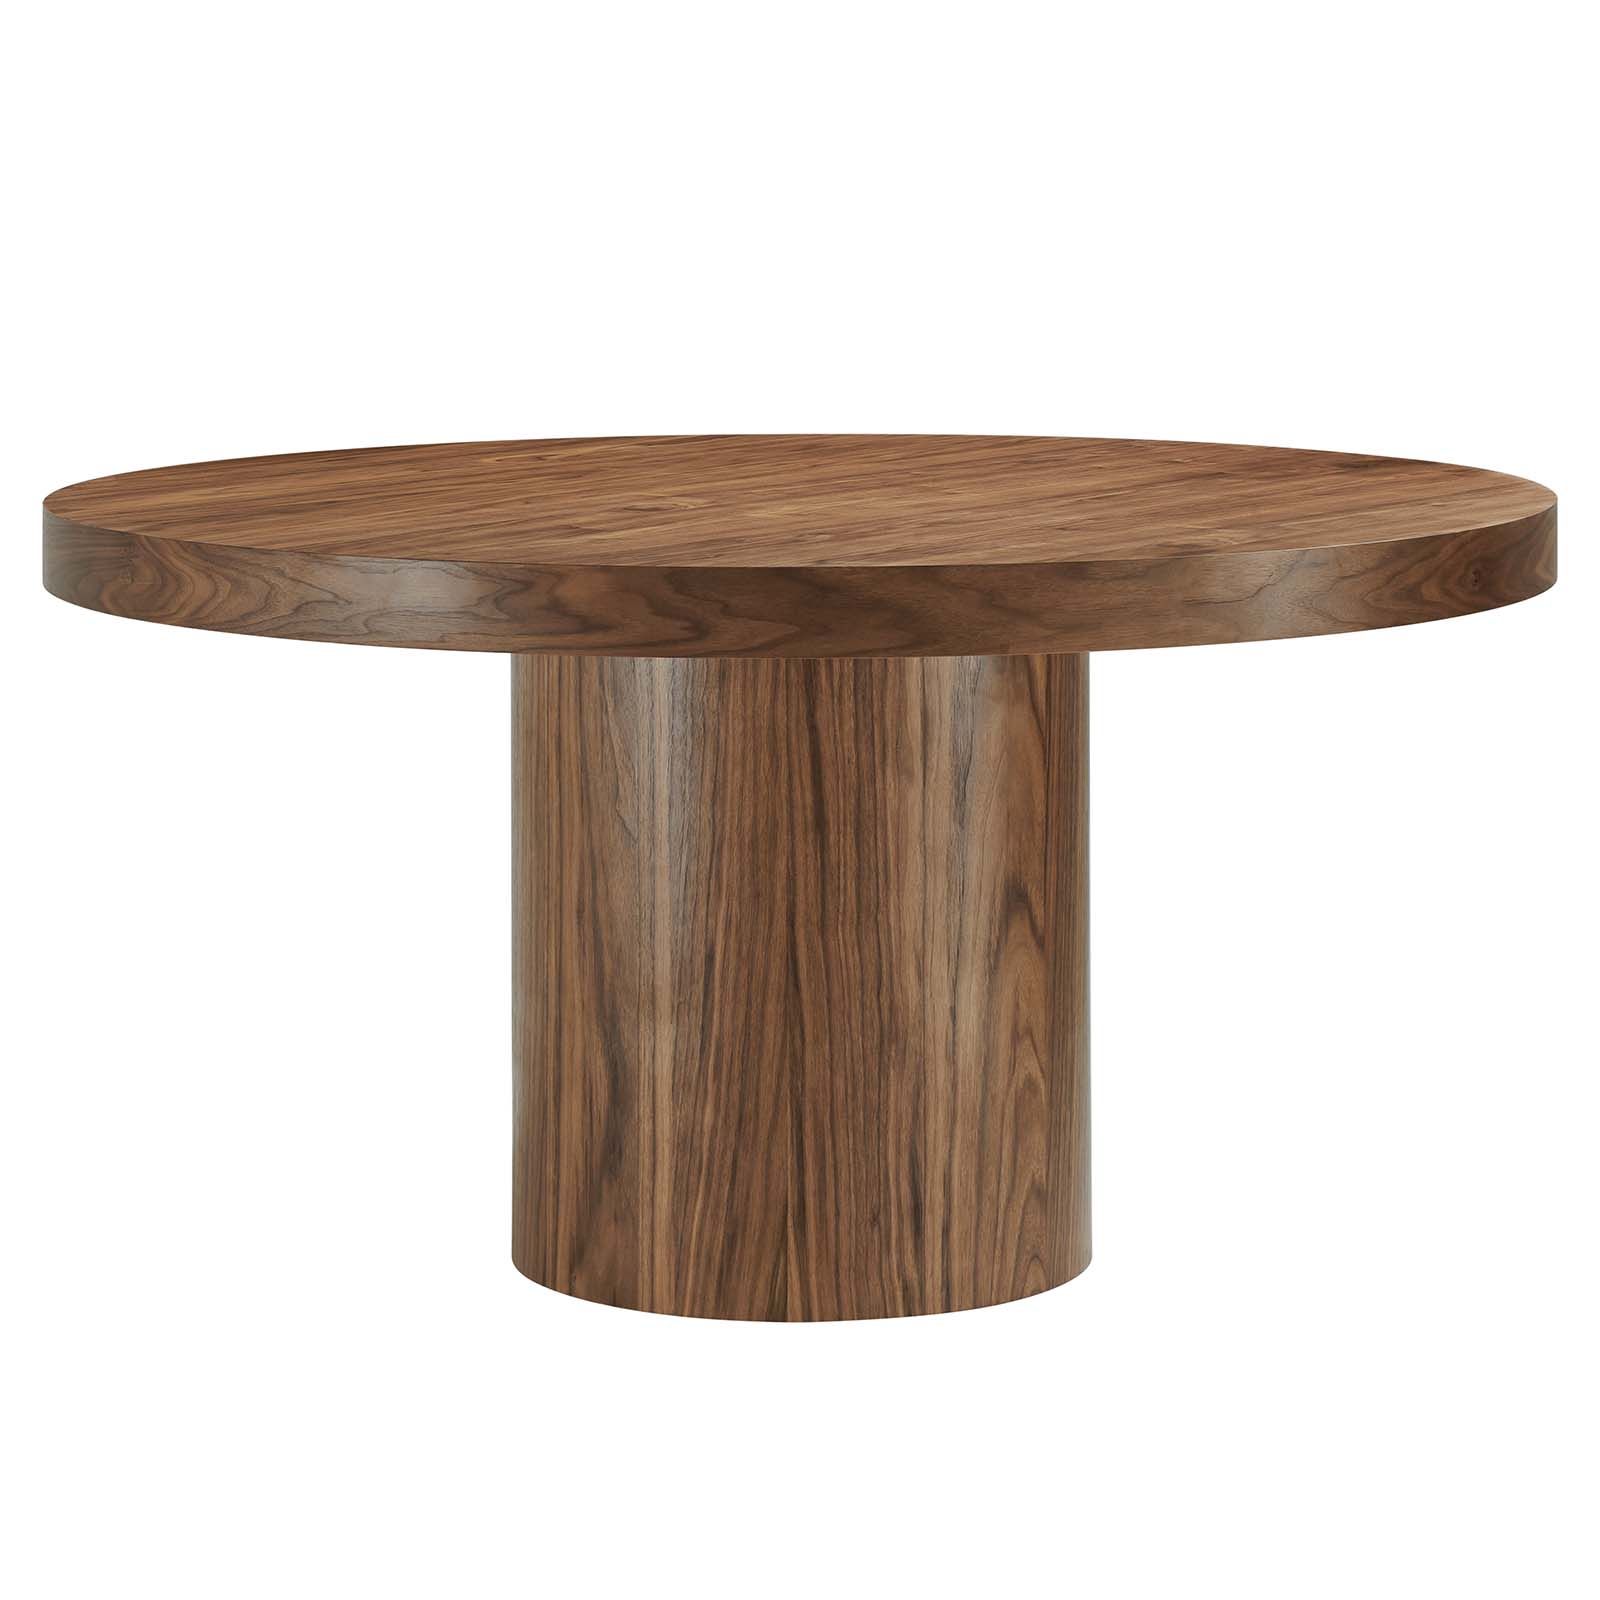 Gratify Round Dining Table At Allmine Com